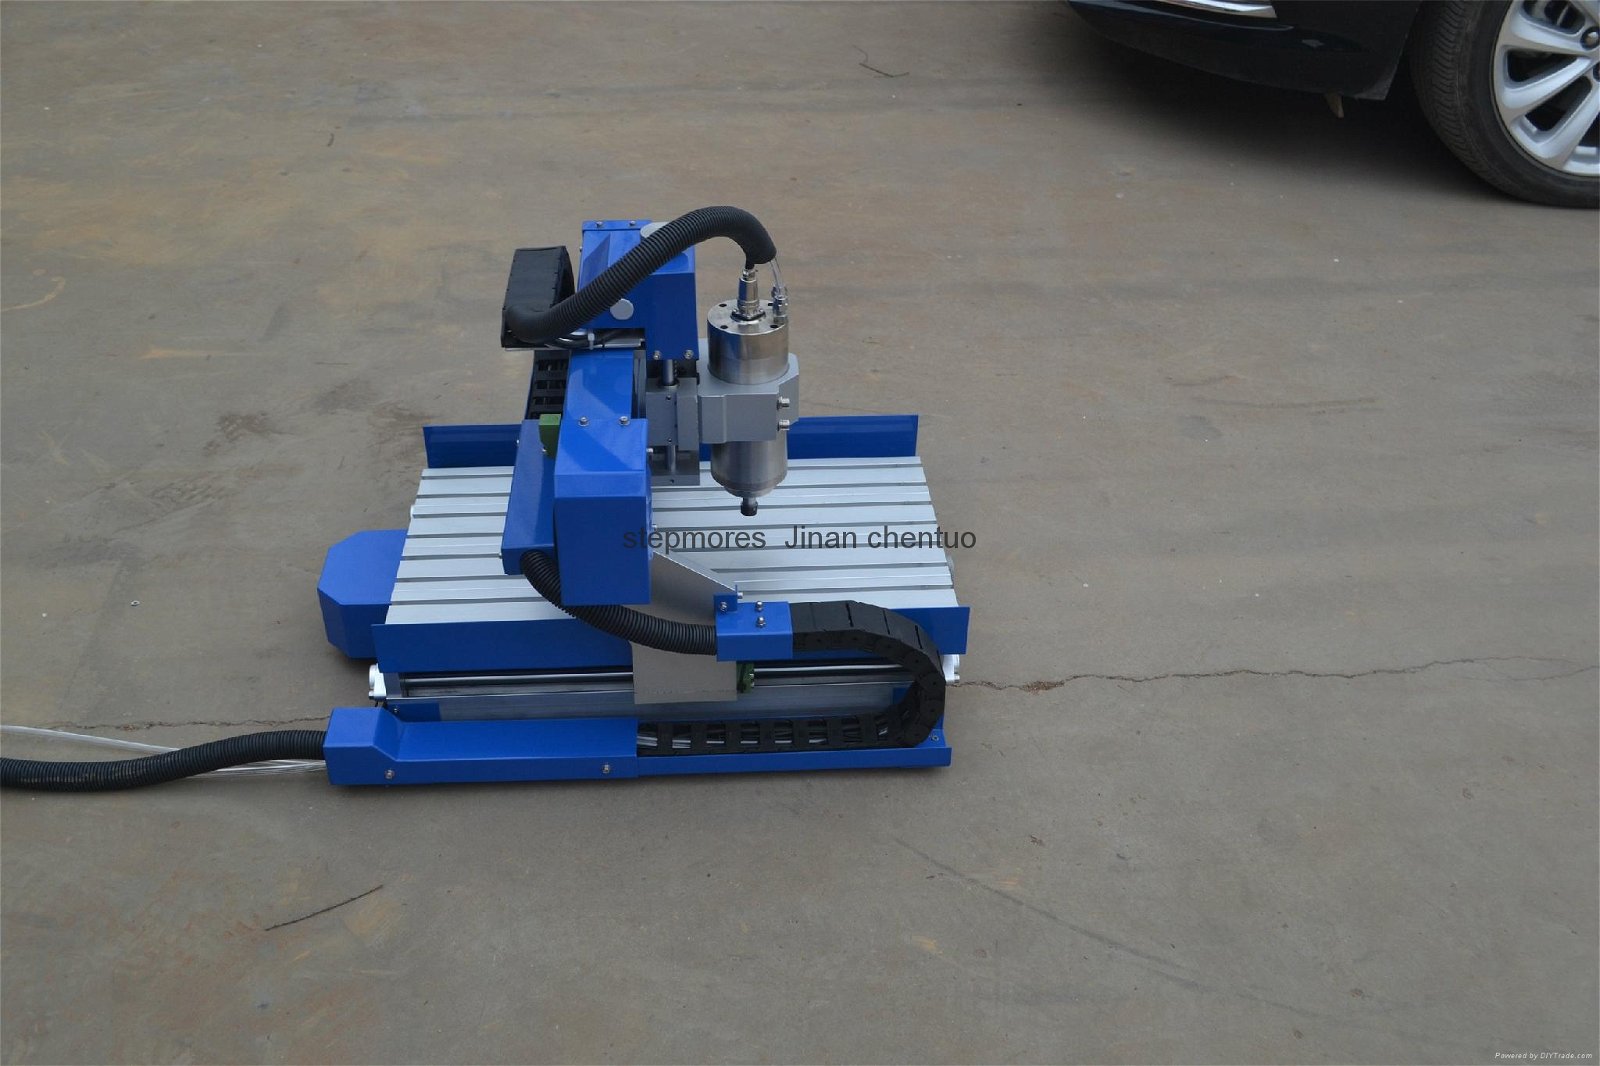 Hot 3040 300*400mm Hobby Mini CNC Router 4